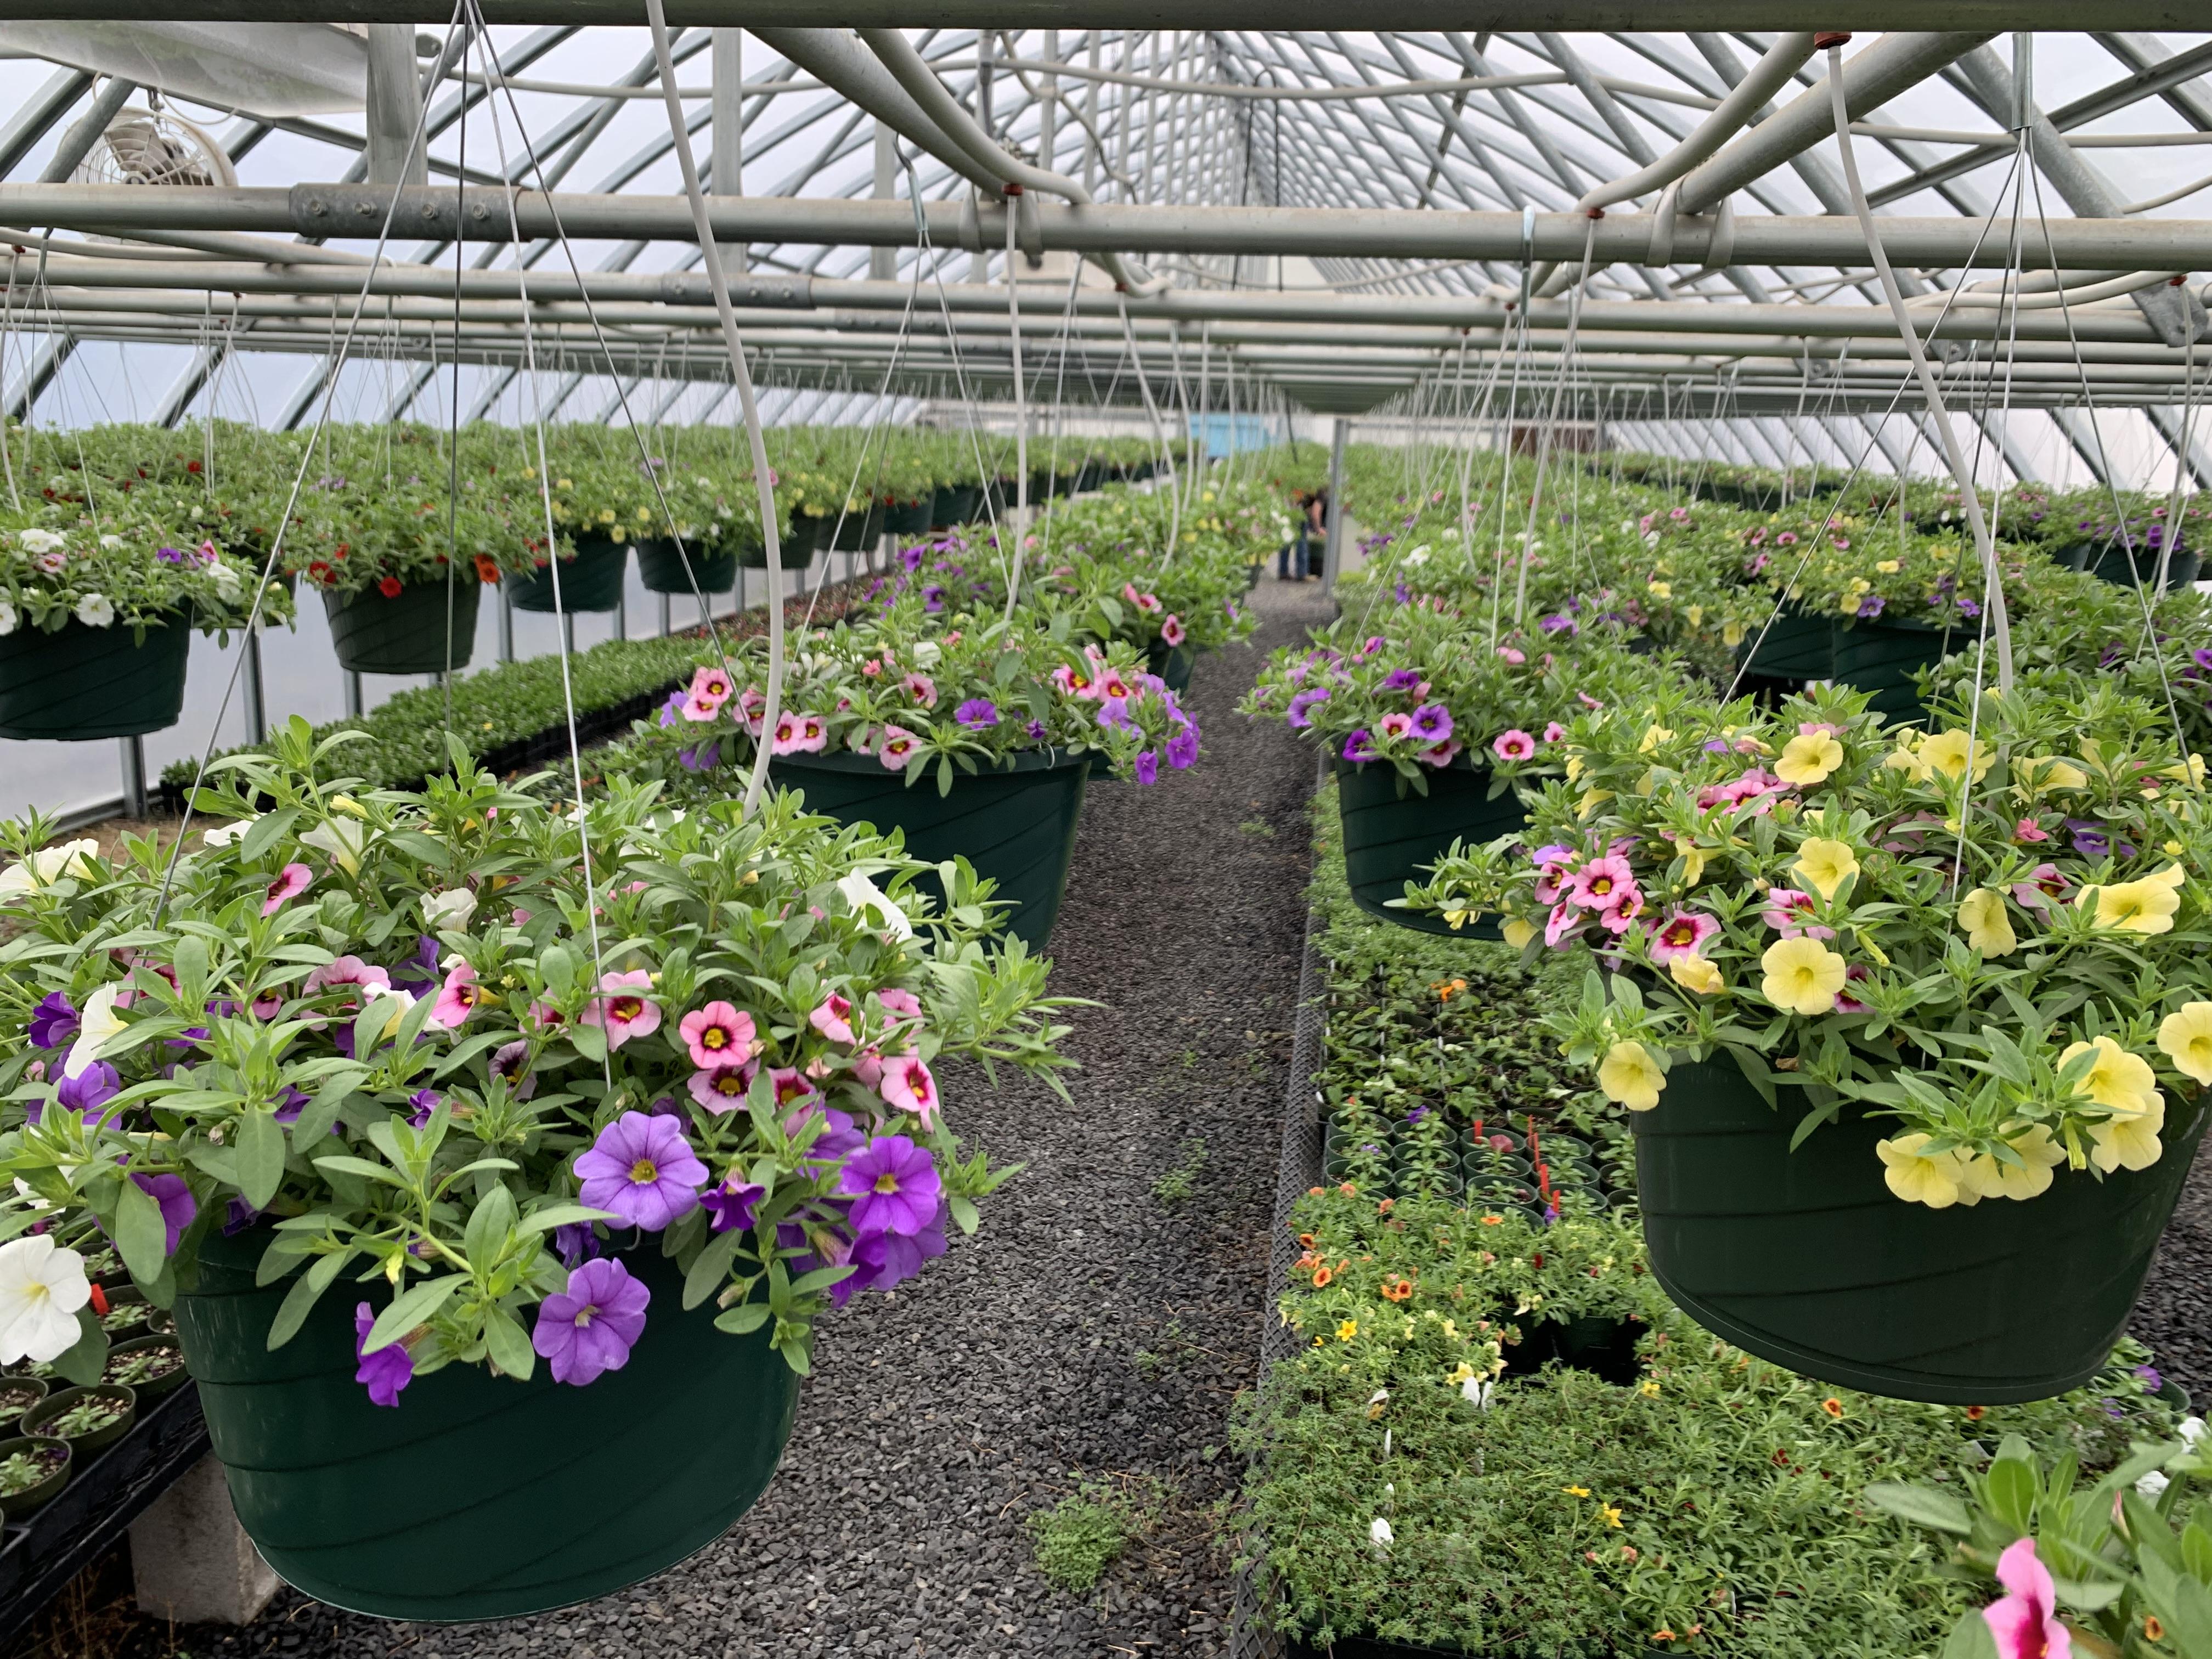 Different colored pansy plants hanging in a greenhouse